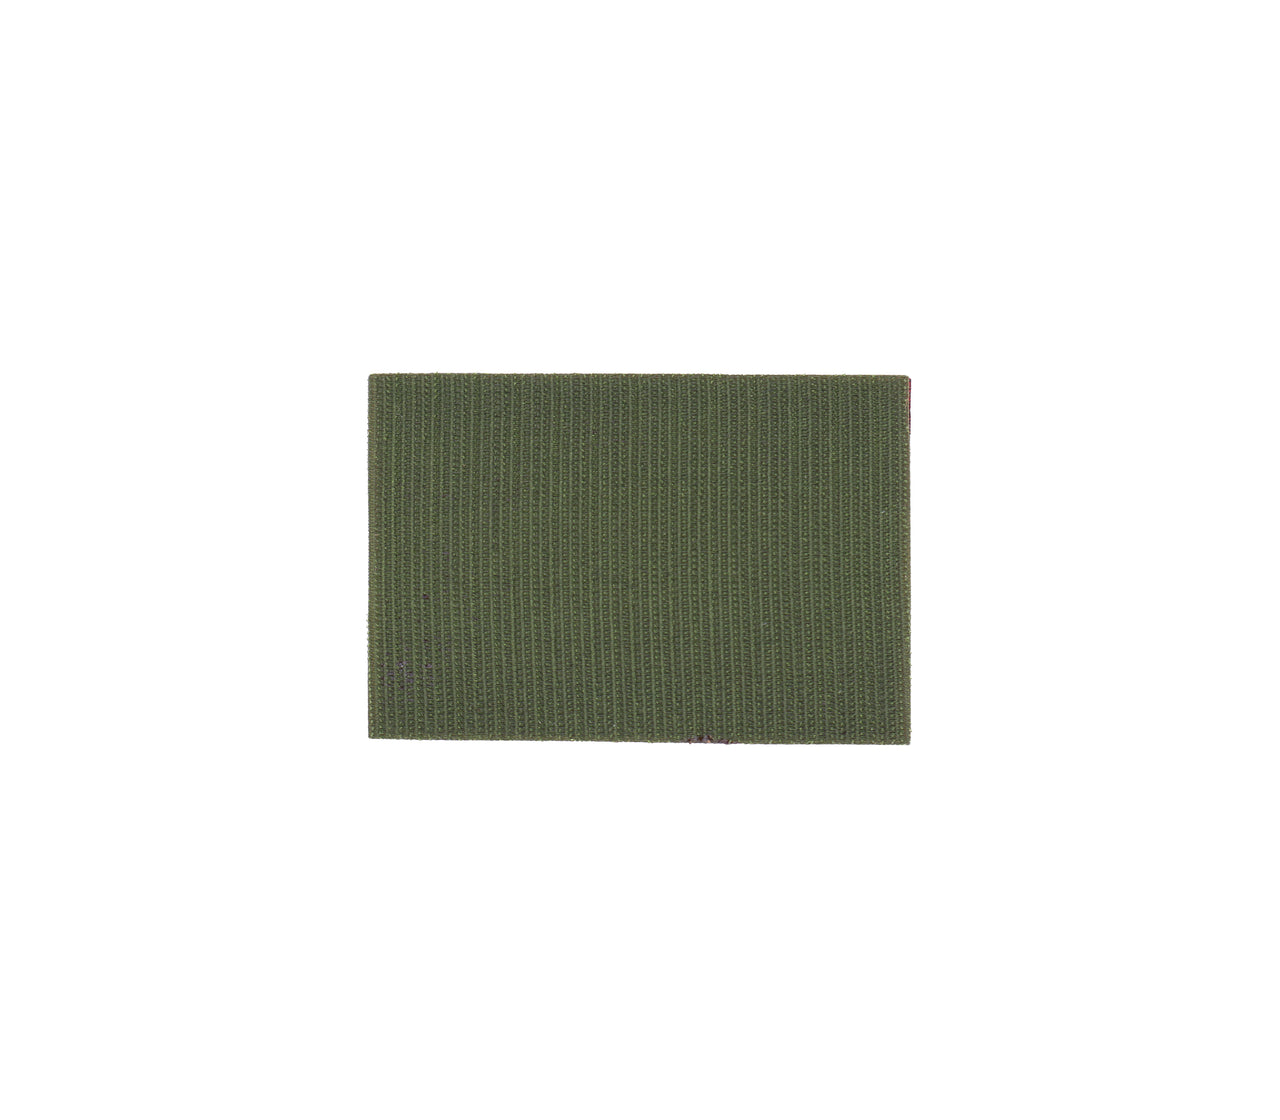 Indian Army Flag Patch - 2.5 x 3.5 Inches